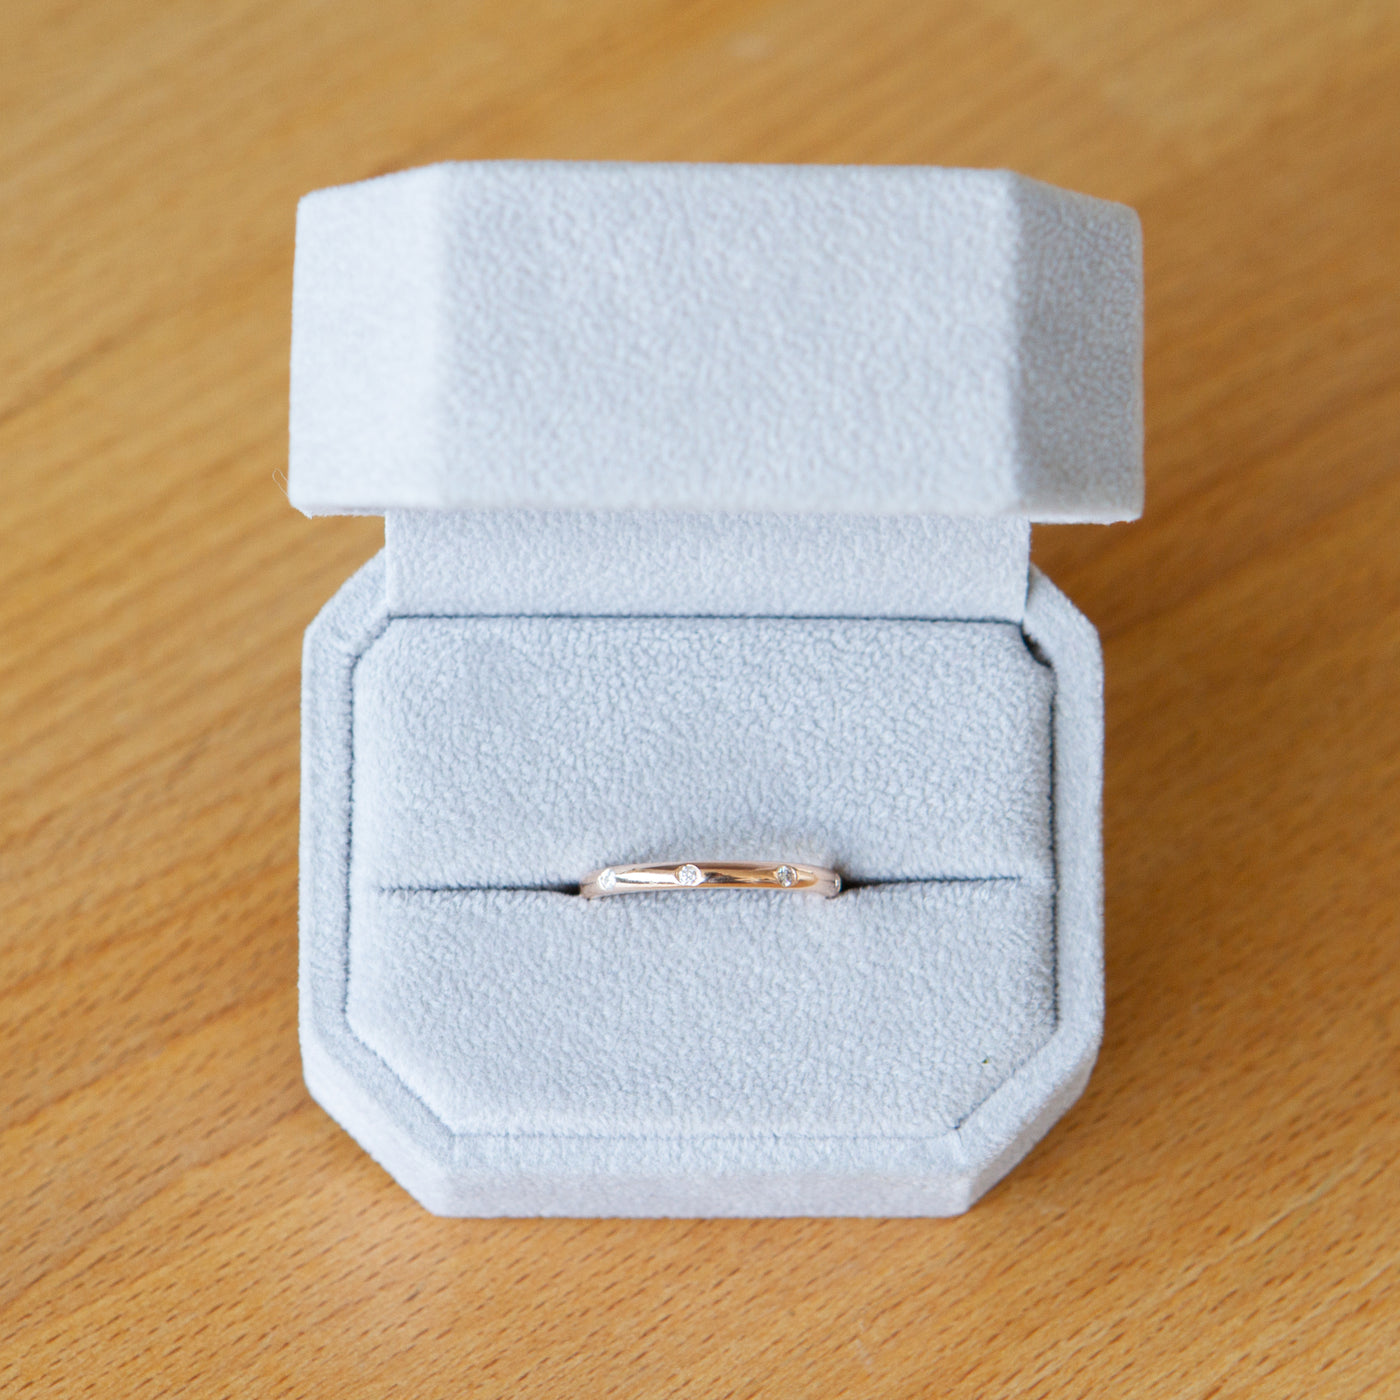 14k rose gold lassen band in a ring box